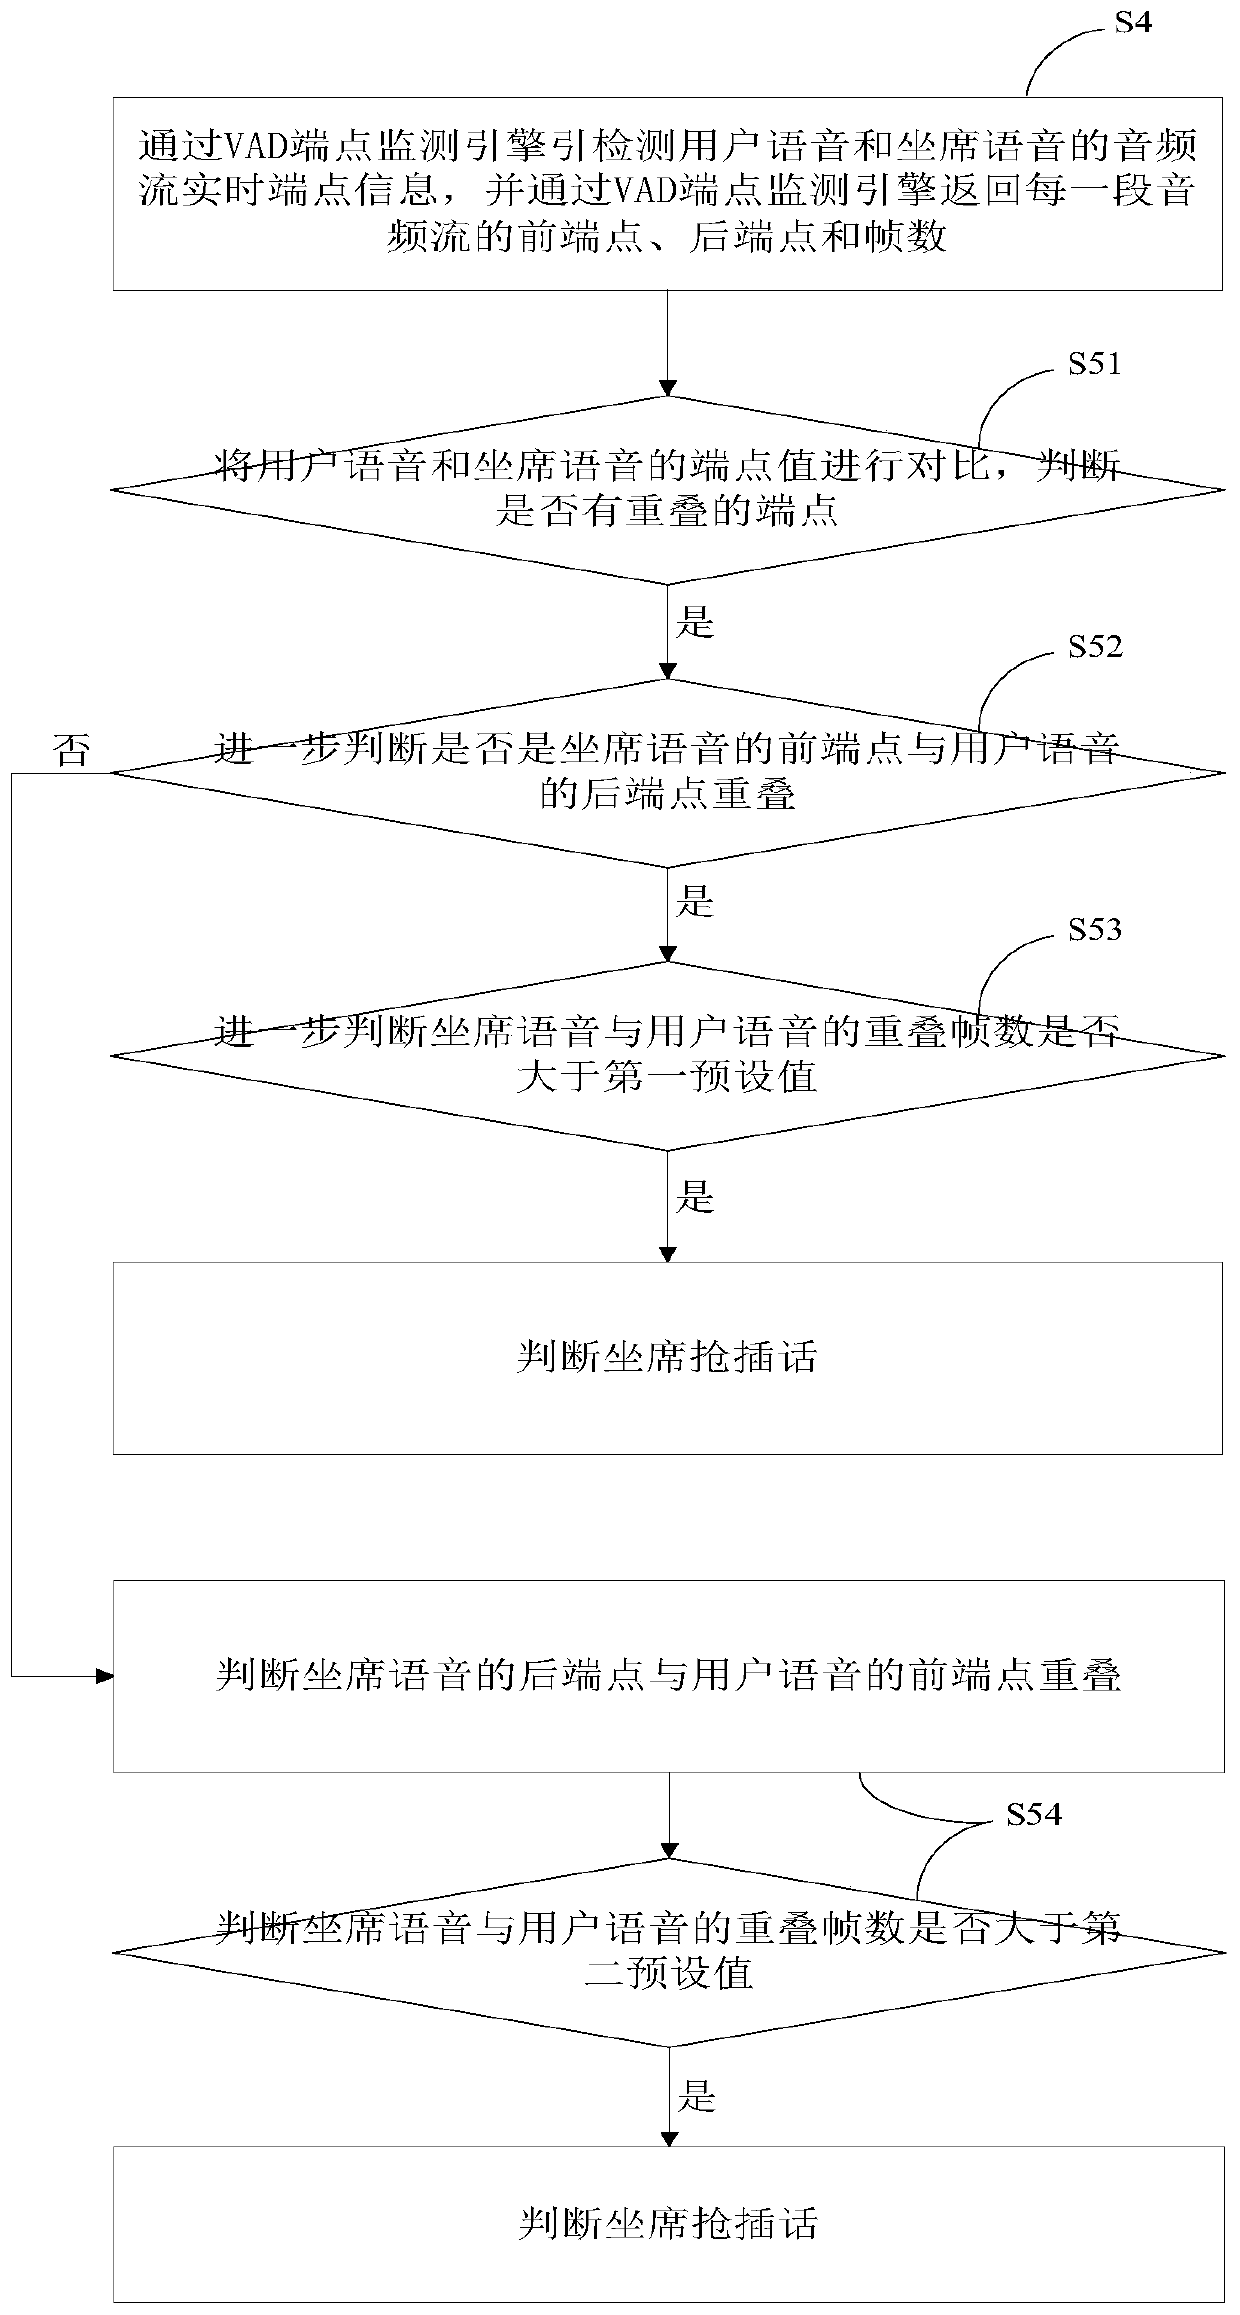 Full-quantity real-time automatic service quality inspection system and method